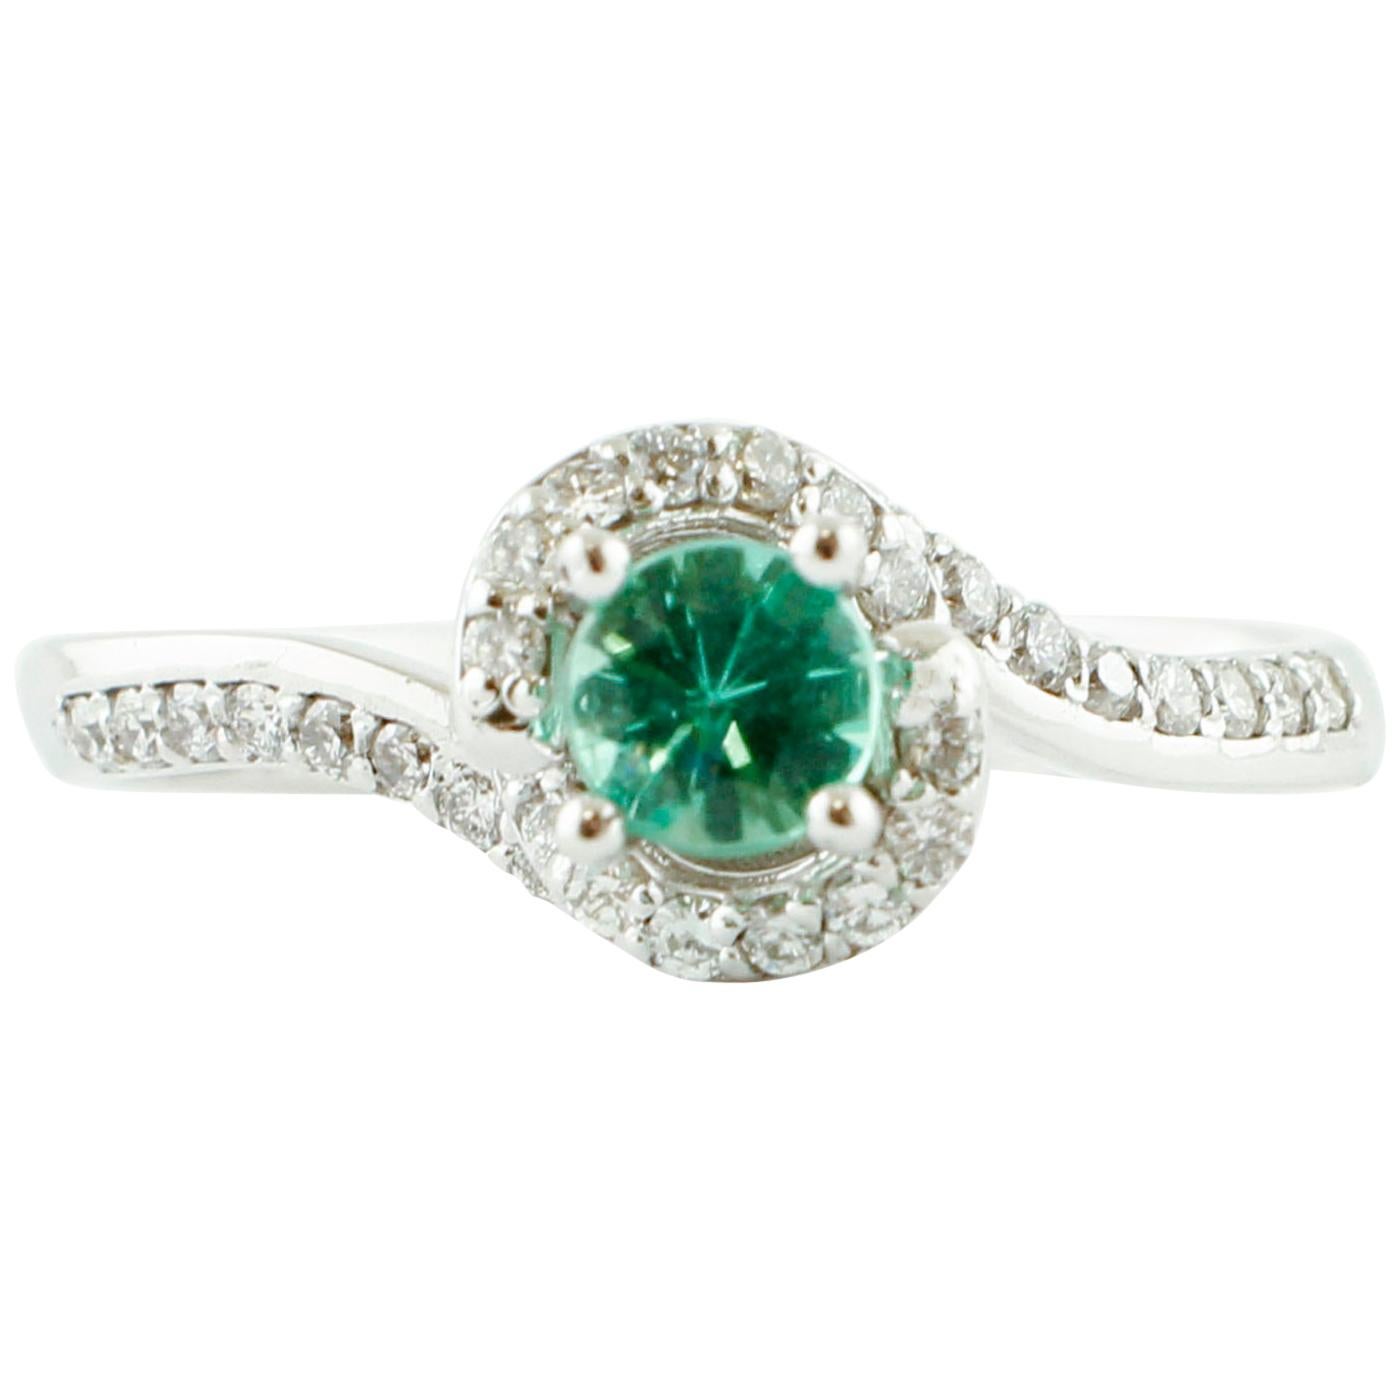 Diamonds, Emerald, 18 Karat White Gold Engagement/Solitaire Ring For Sale